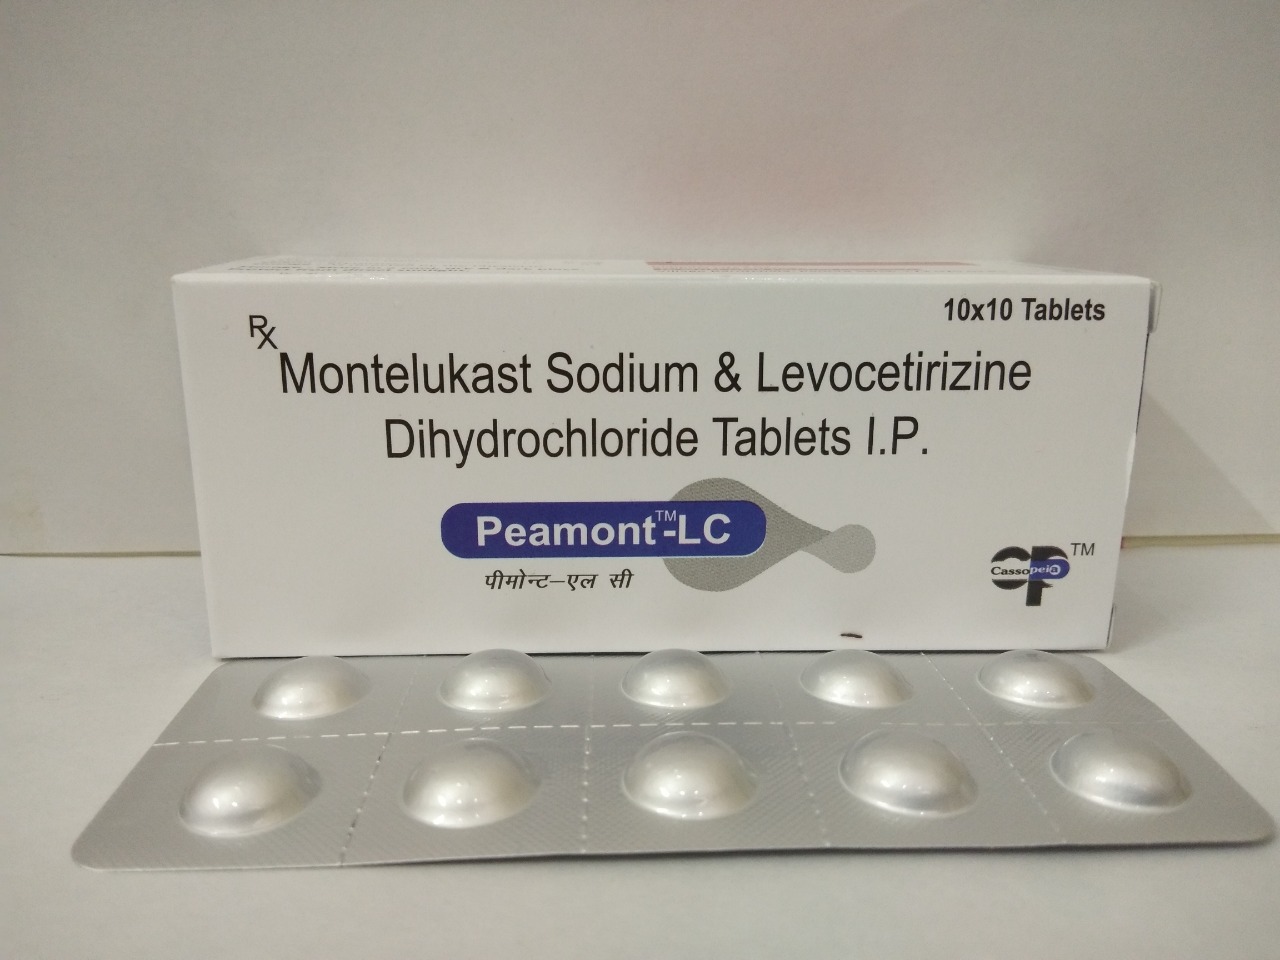 Product Name: Peamont LC, Compositions of Peamont LC are Montelukast Sodium & Levocetrizine Dihydrochloride Tablets IP - Cassopeia Pharmaceutical Pvt Ltd